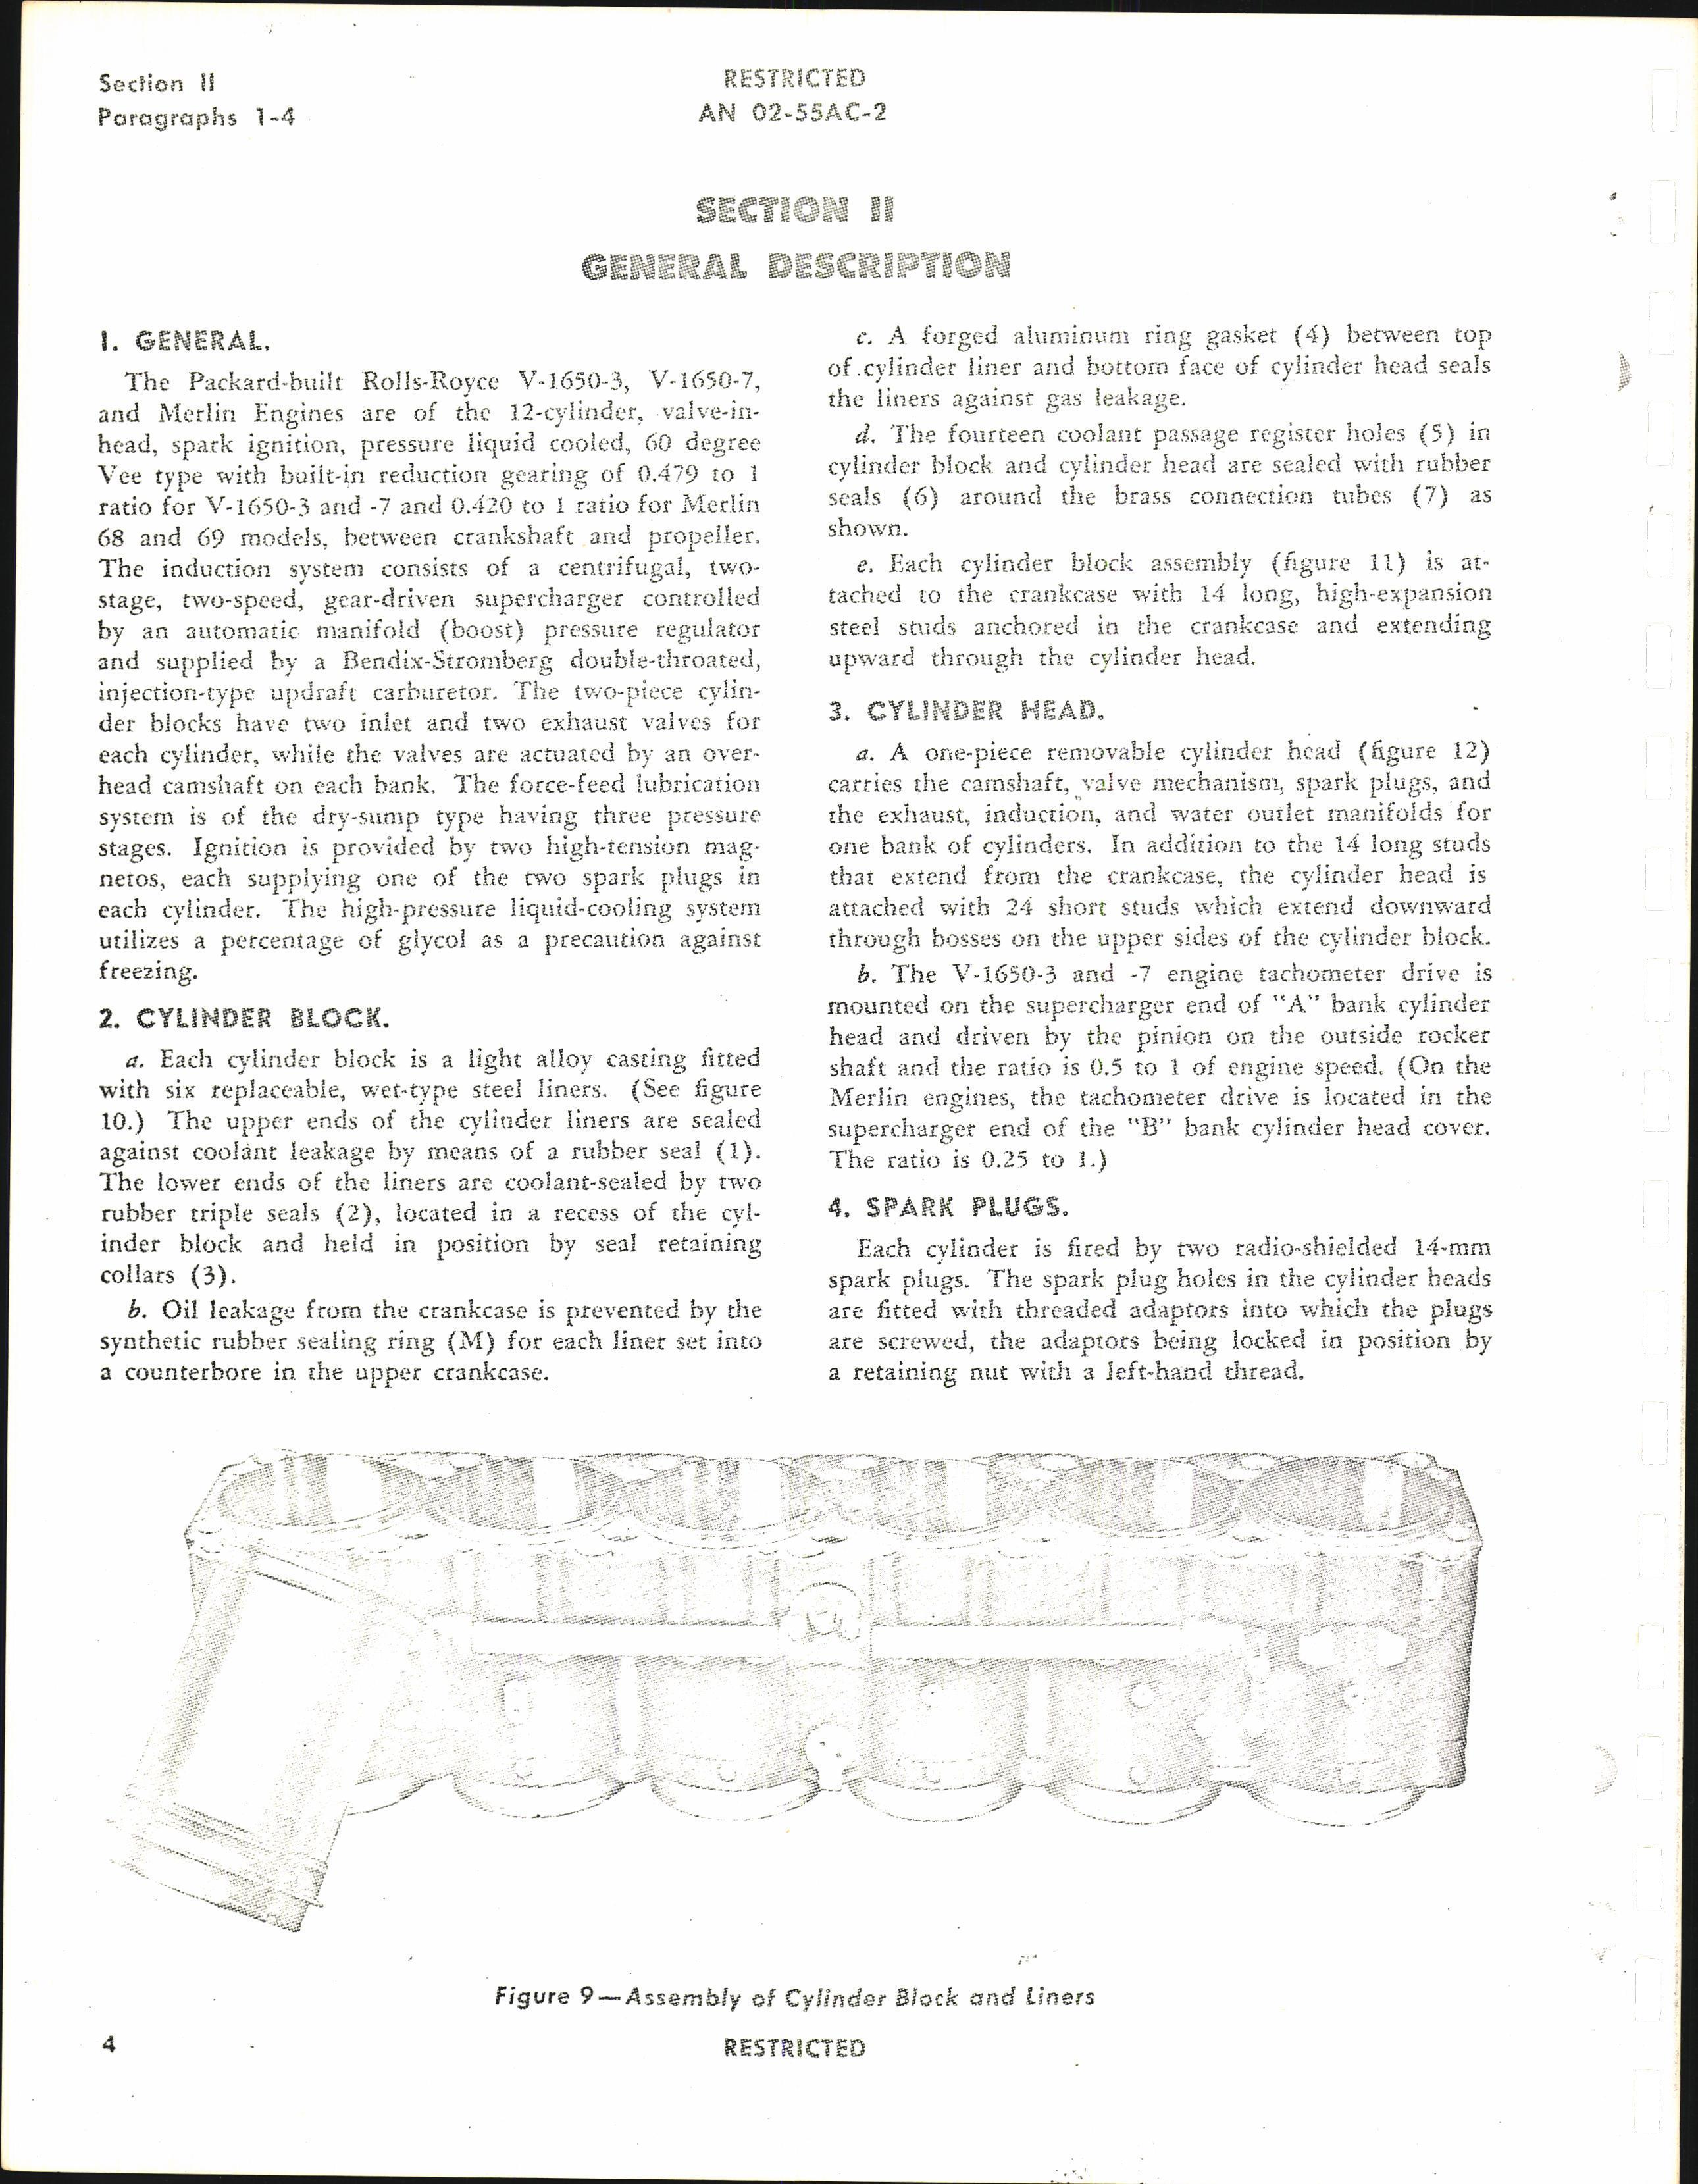 Sample page 18 from AirCorps Library document: Service Instructions for V-1650-3, -7, and Merlin 68 and 69 Engines